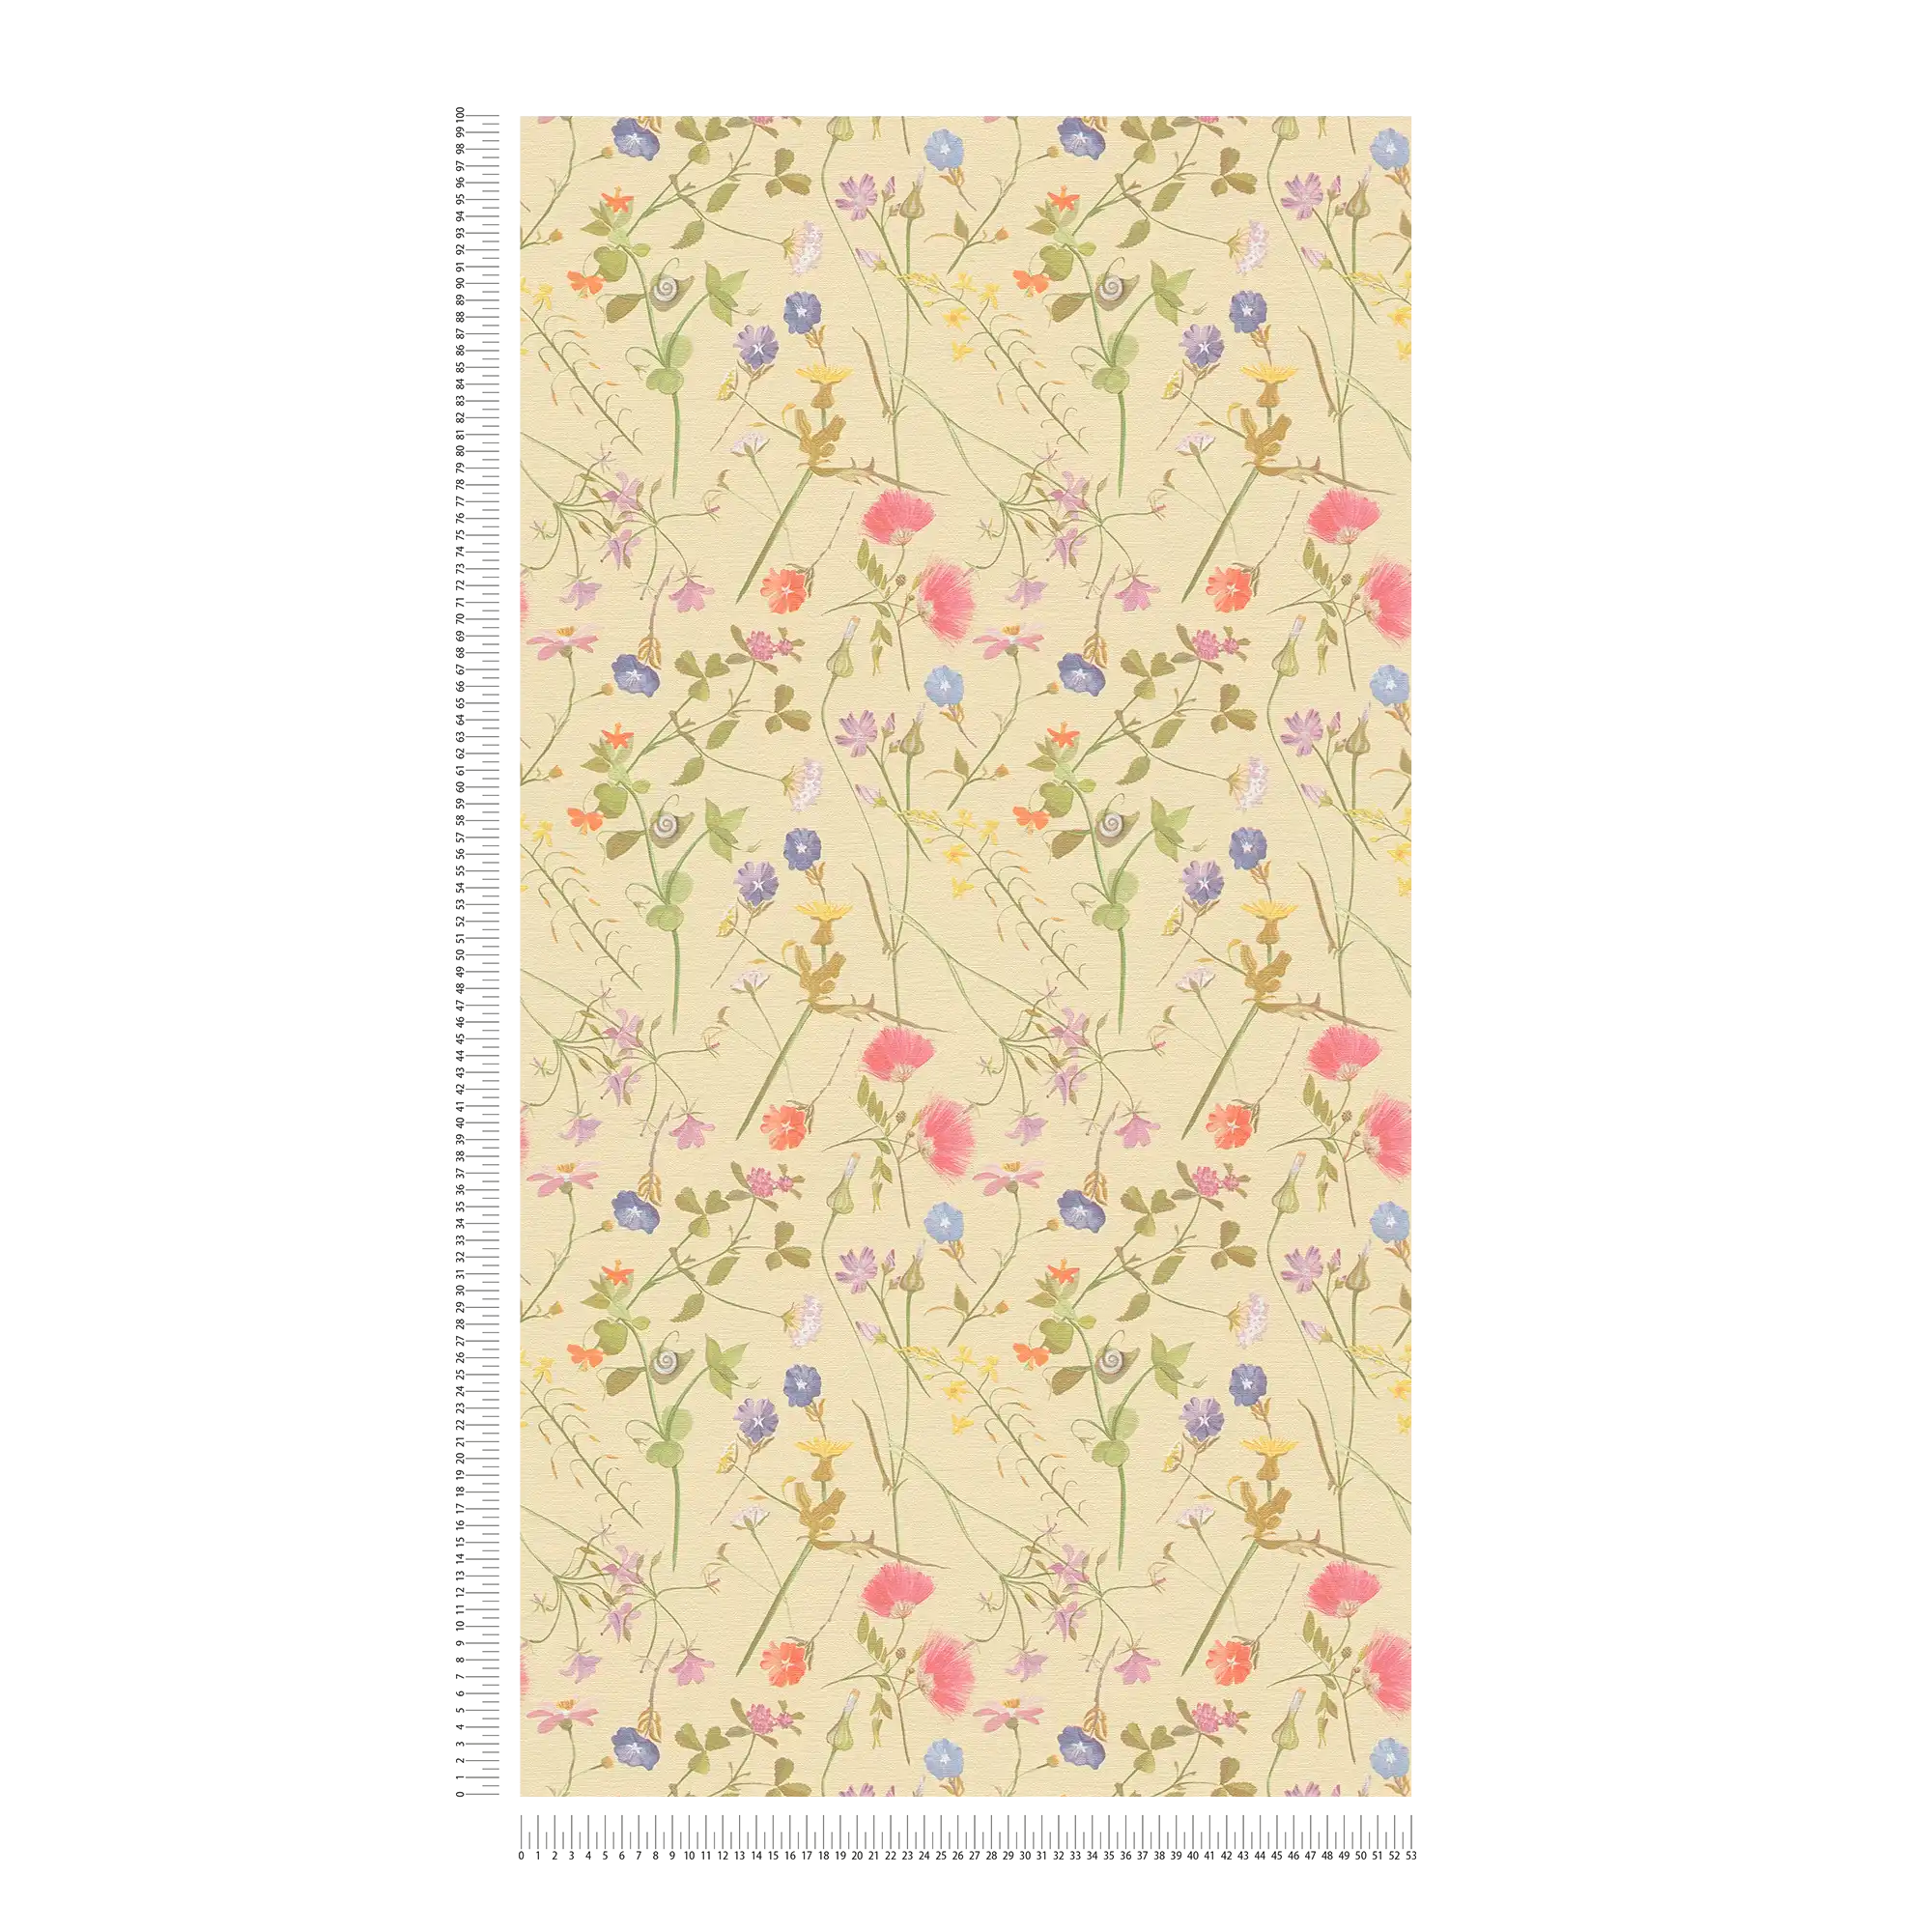             Playful non-woven wallpaper with different flowers - yellow, green, colourful
        